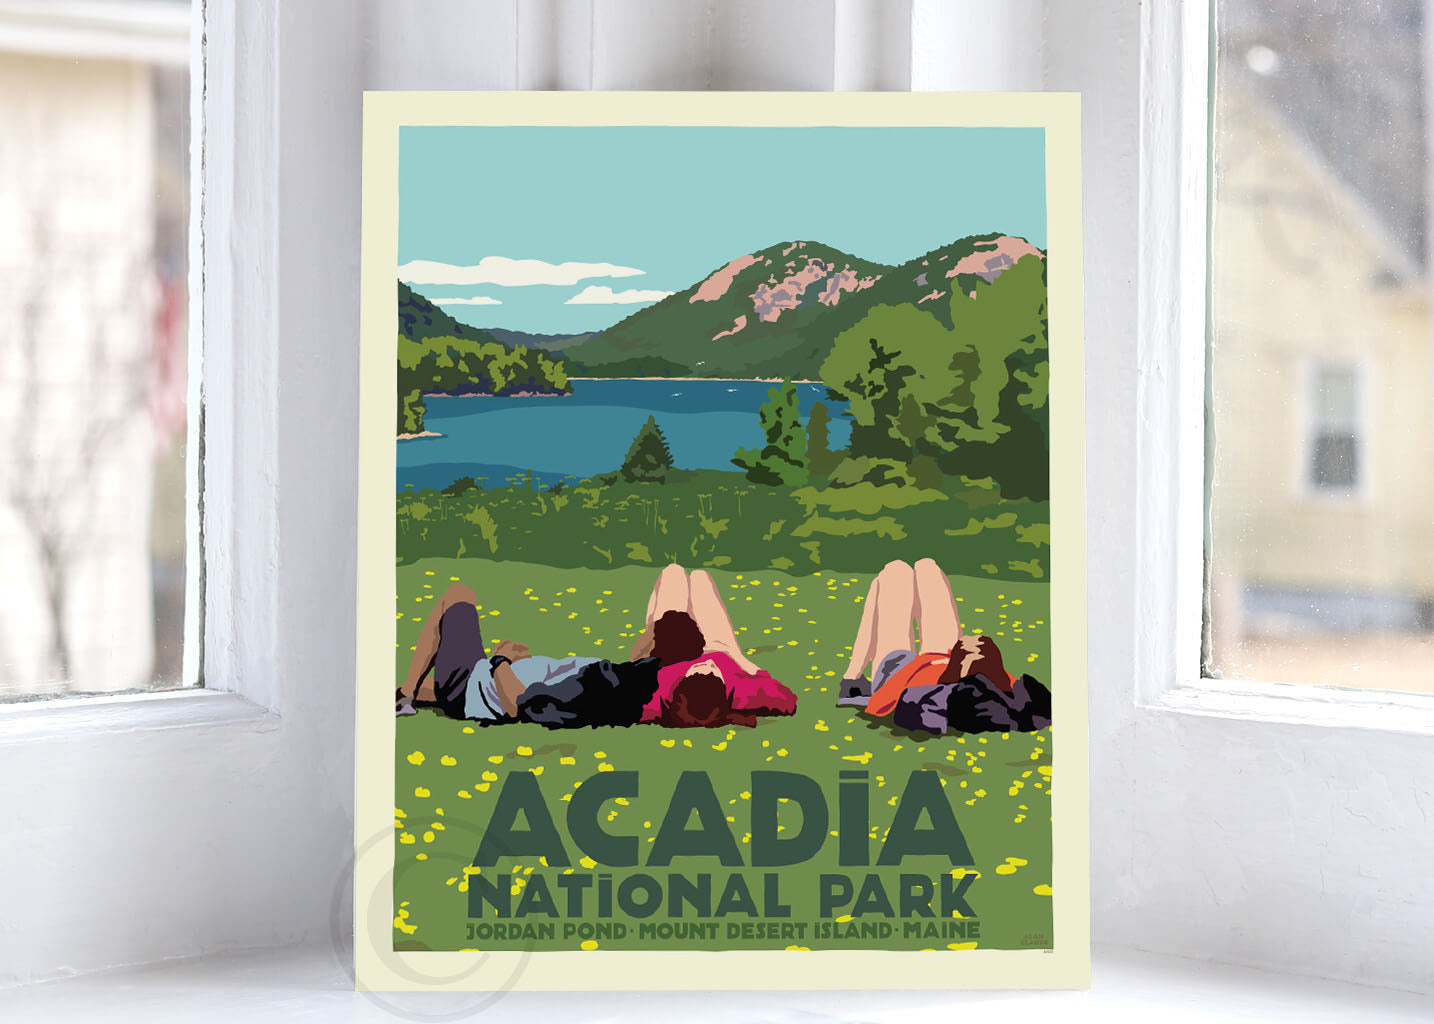 Hikers in Acadia National Park Art Print 8" x 10" Wall Poster By Alan Claude - Maine